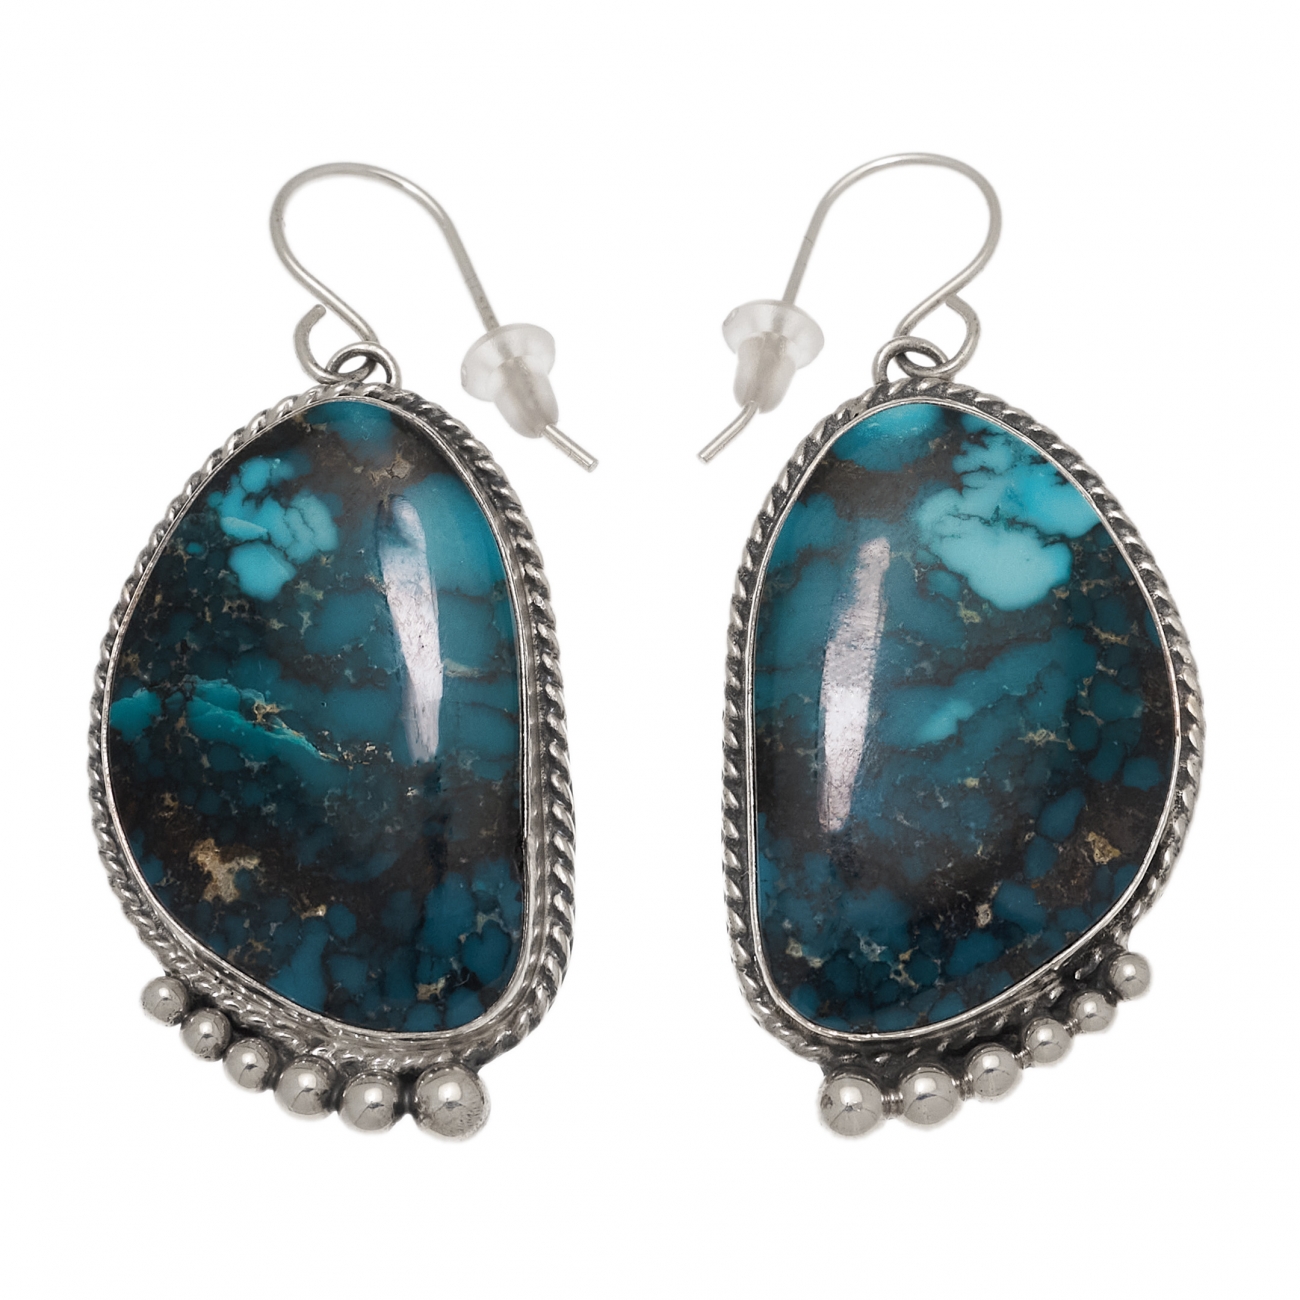 Harpo Paris earrings BO322 in turquoise and silver